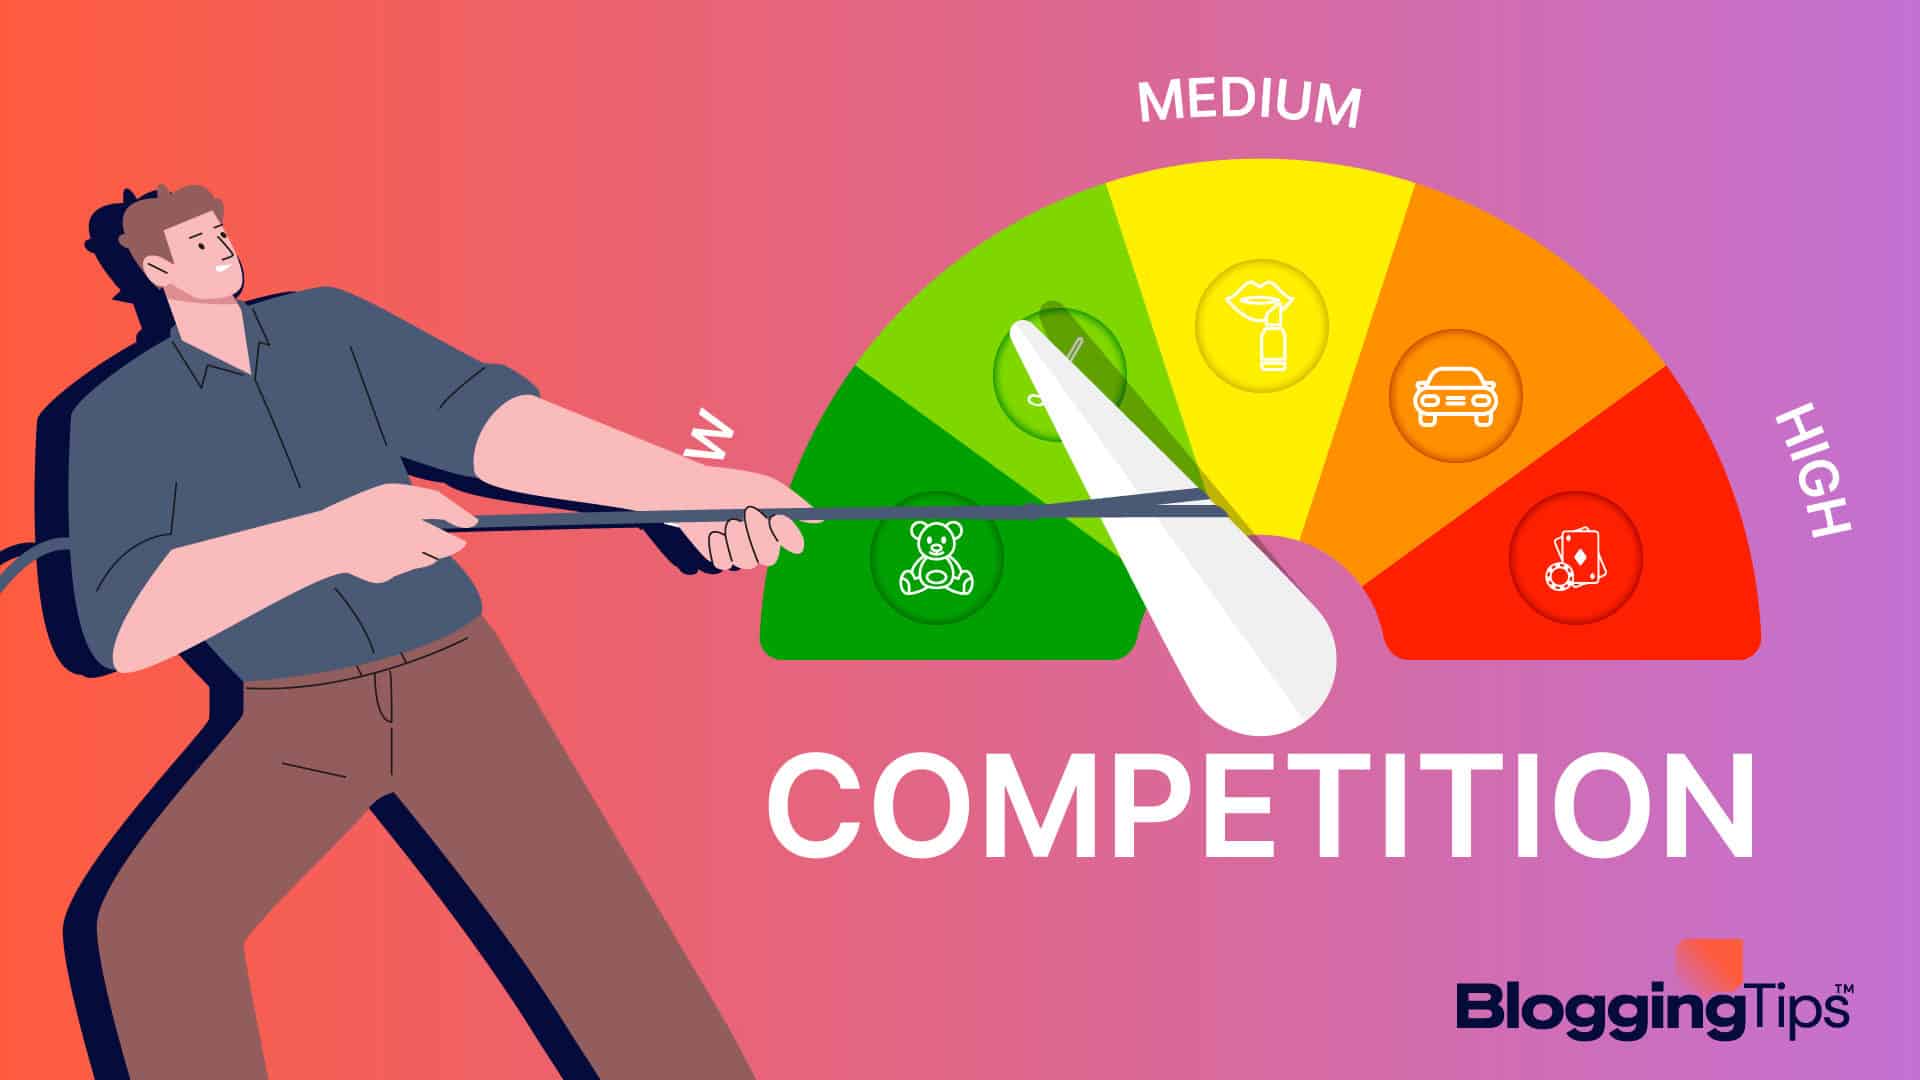 vector graphic showing an illustration of competitive niches